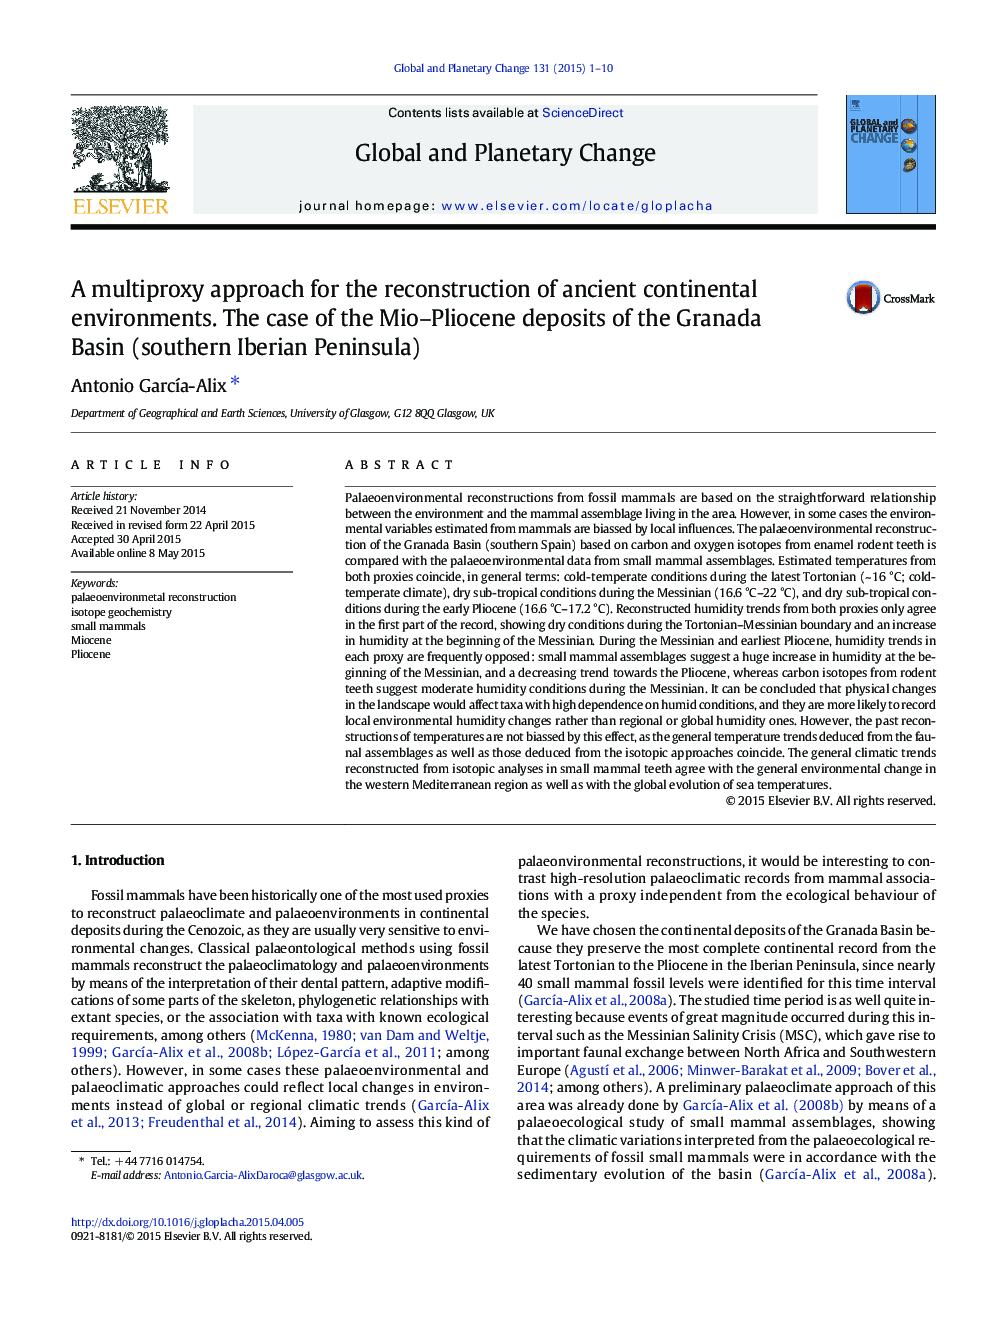 A multiproxy approach for the reconstruction of ancient continental environments. The case of the Mio-Pliocene deposits of the Granada Basin (southern Iberian Peninsula)